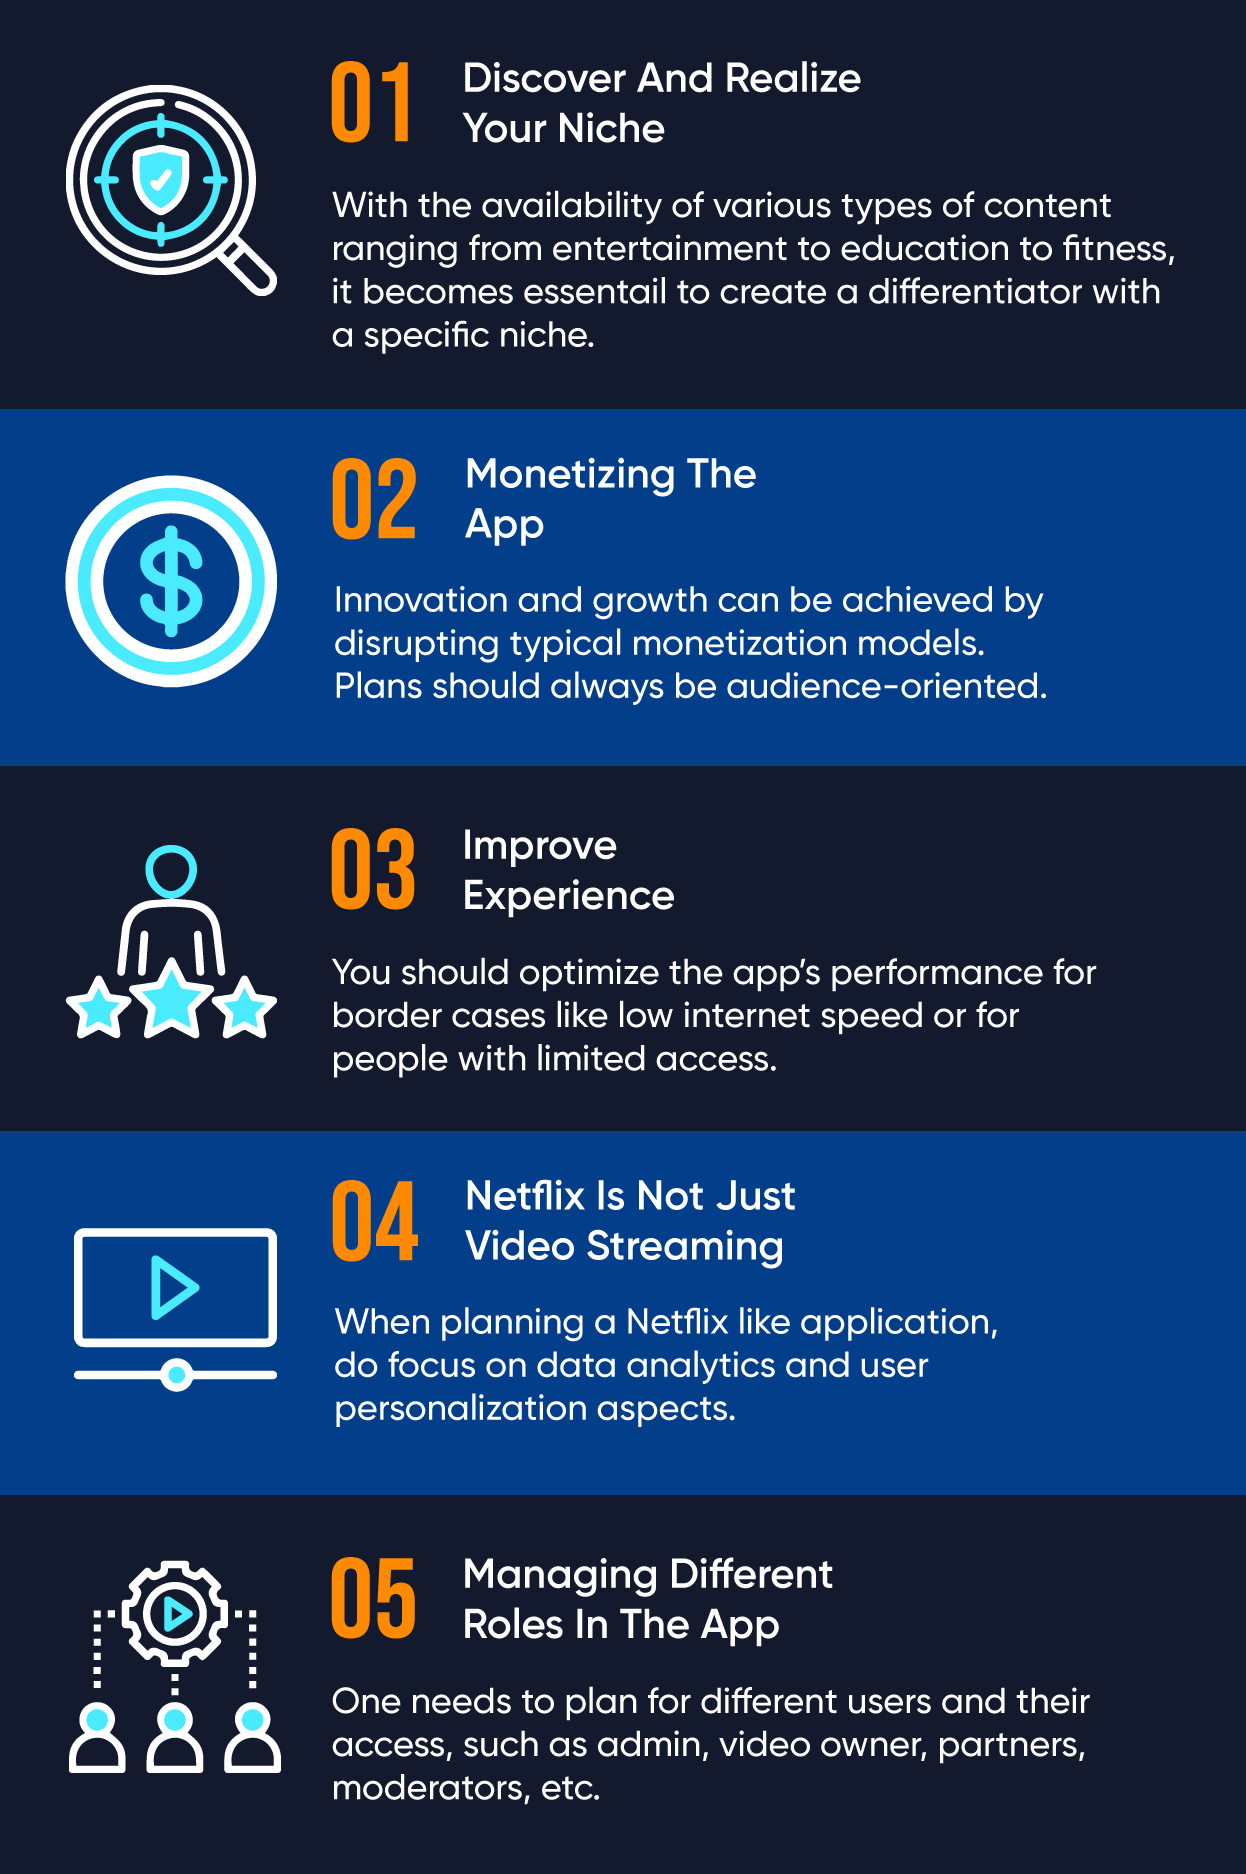 Important Things To Consider When Creating A Video Streaming App